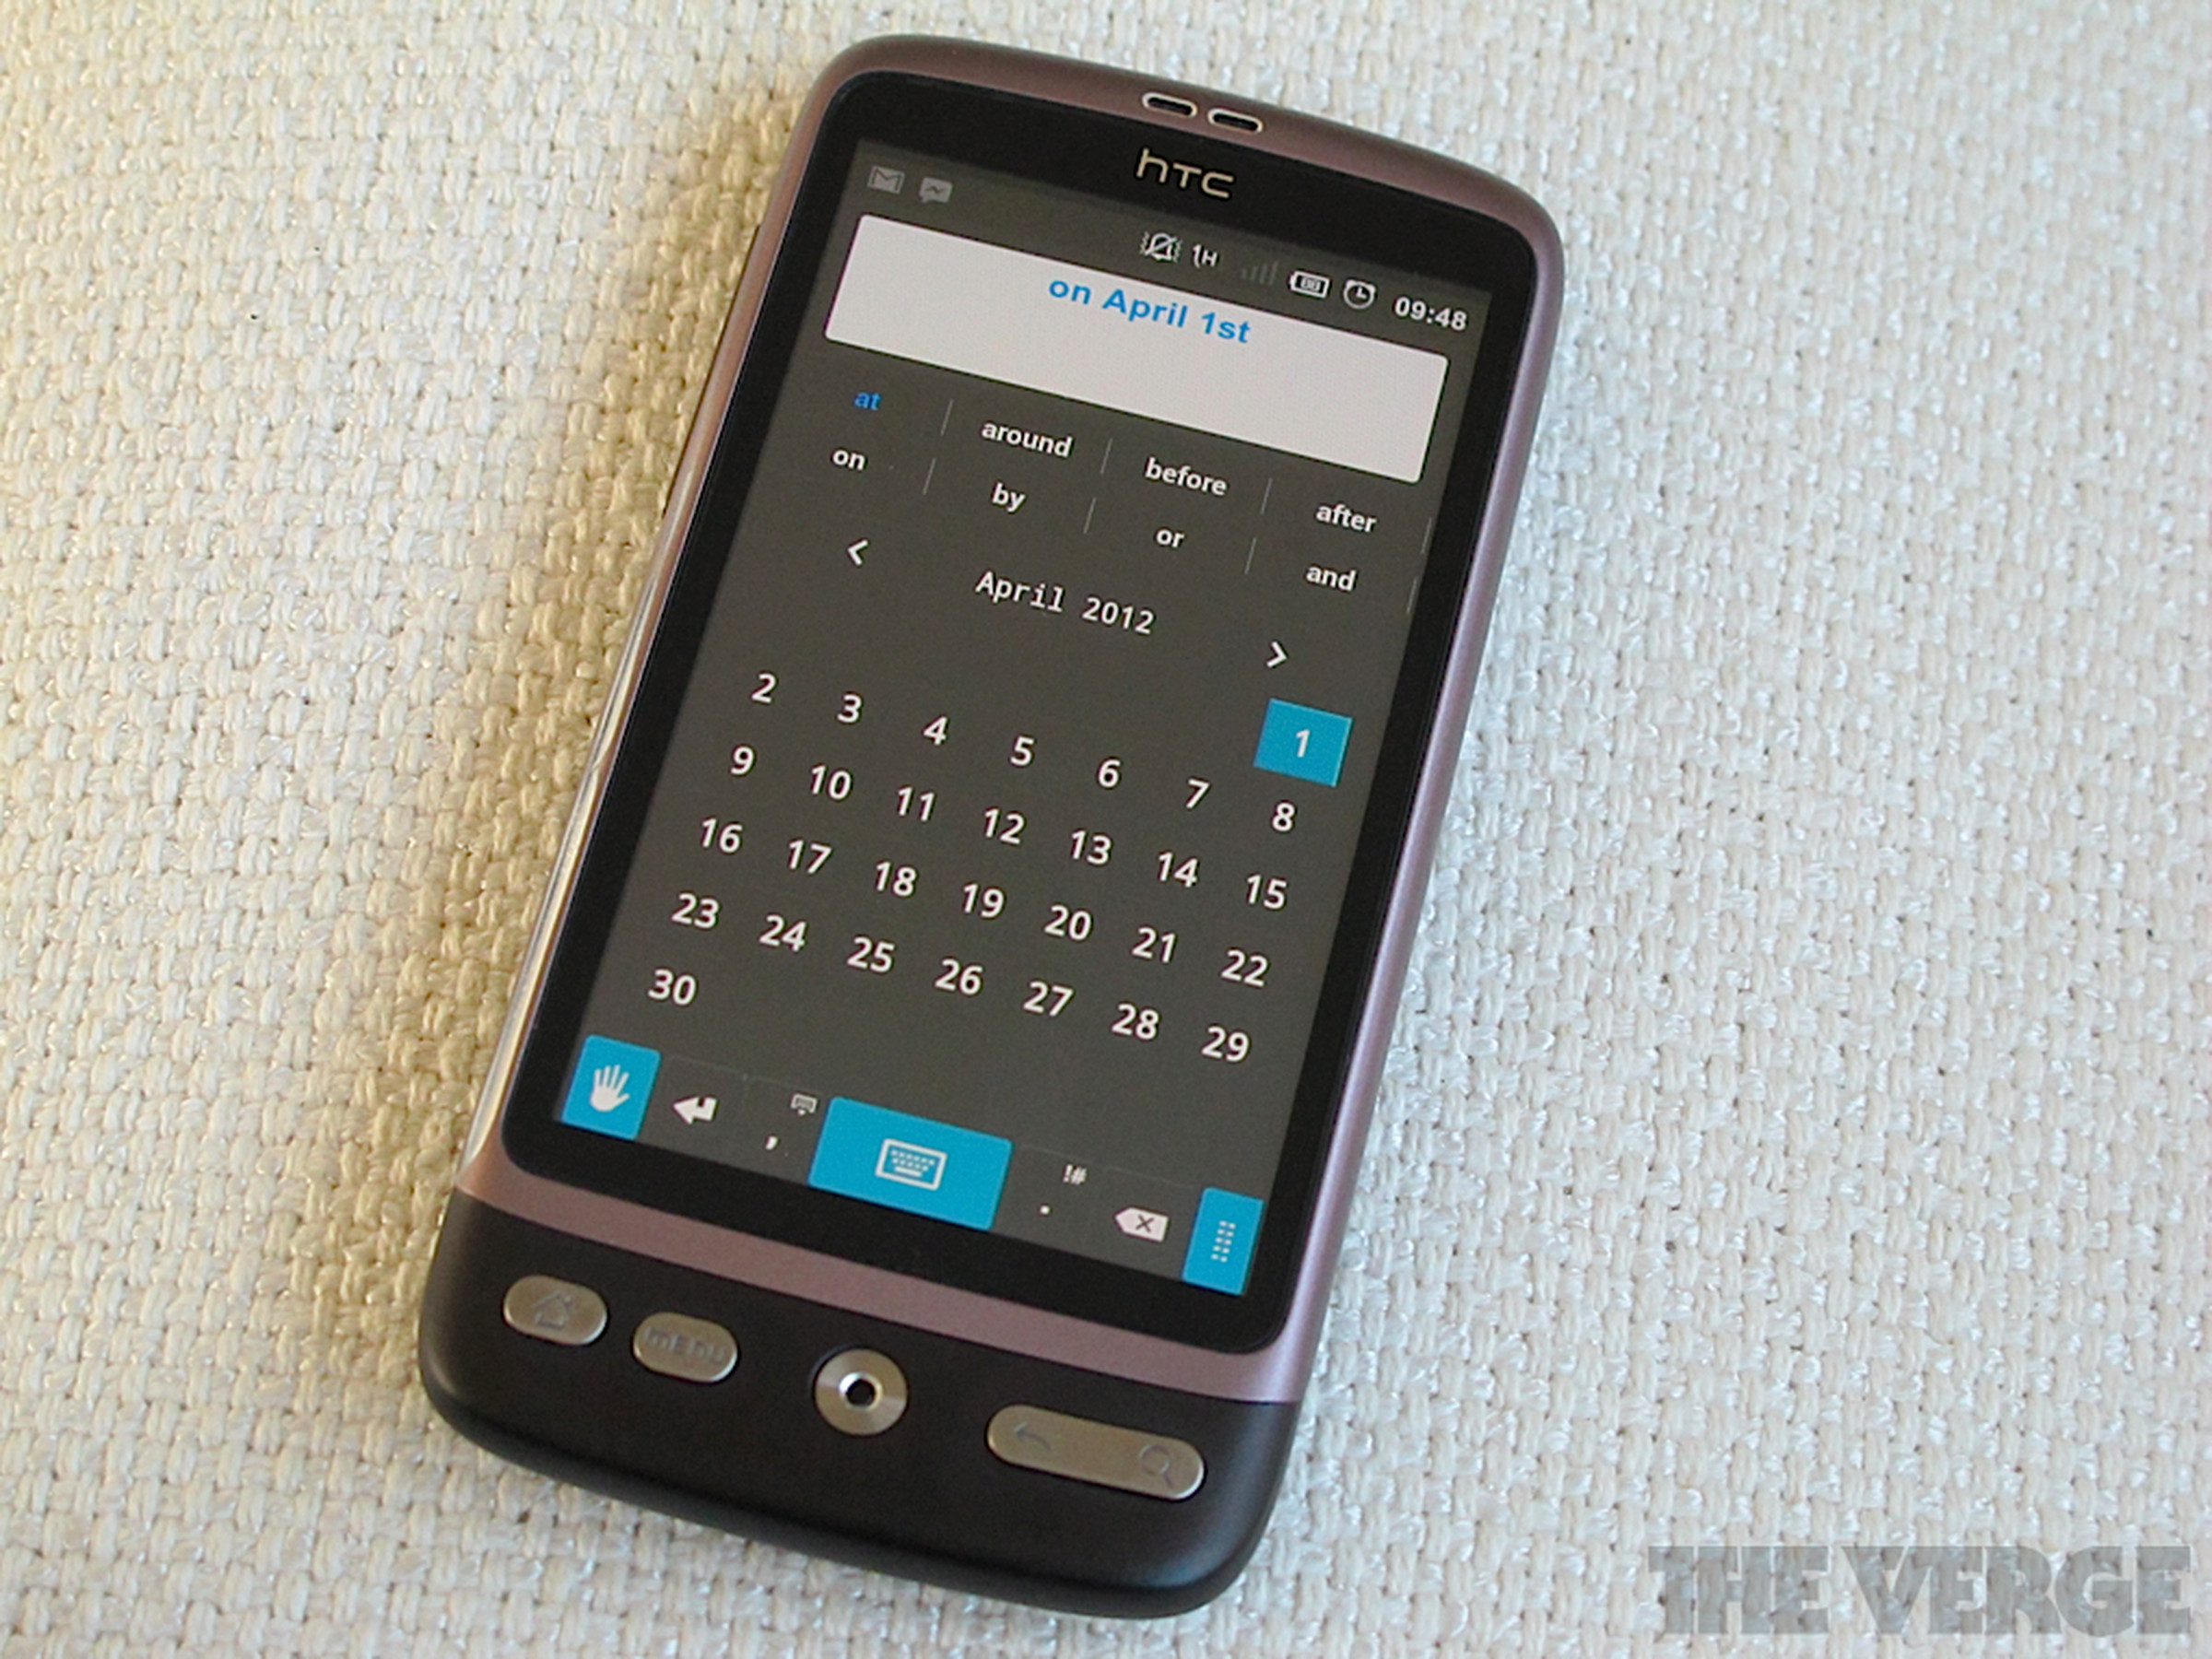 Siine Android Keyboard: hands-on images